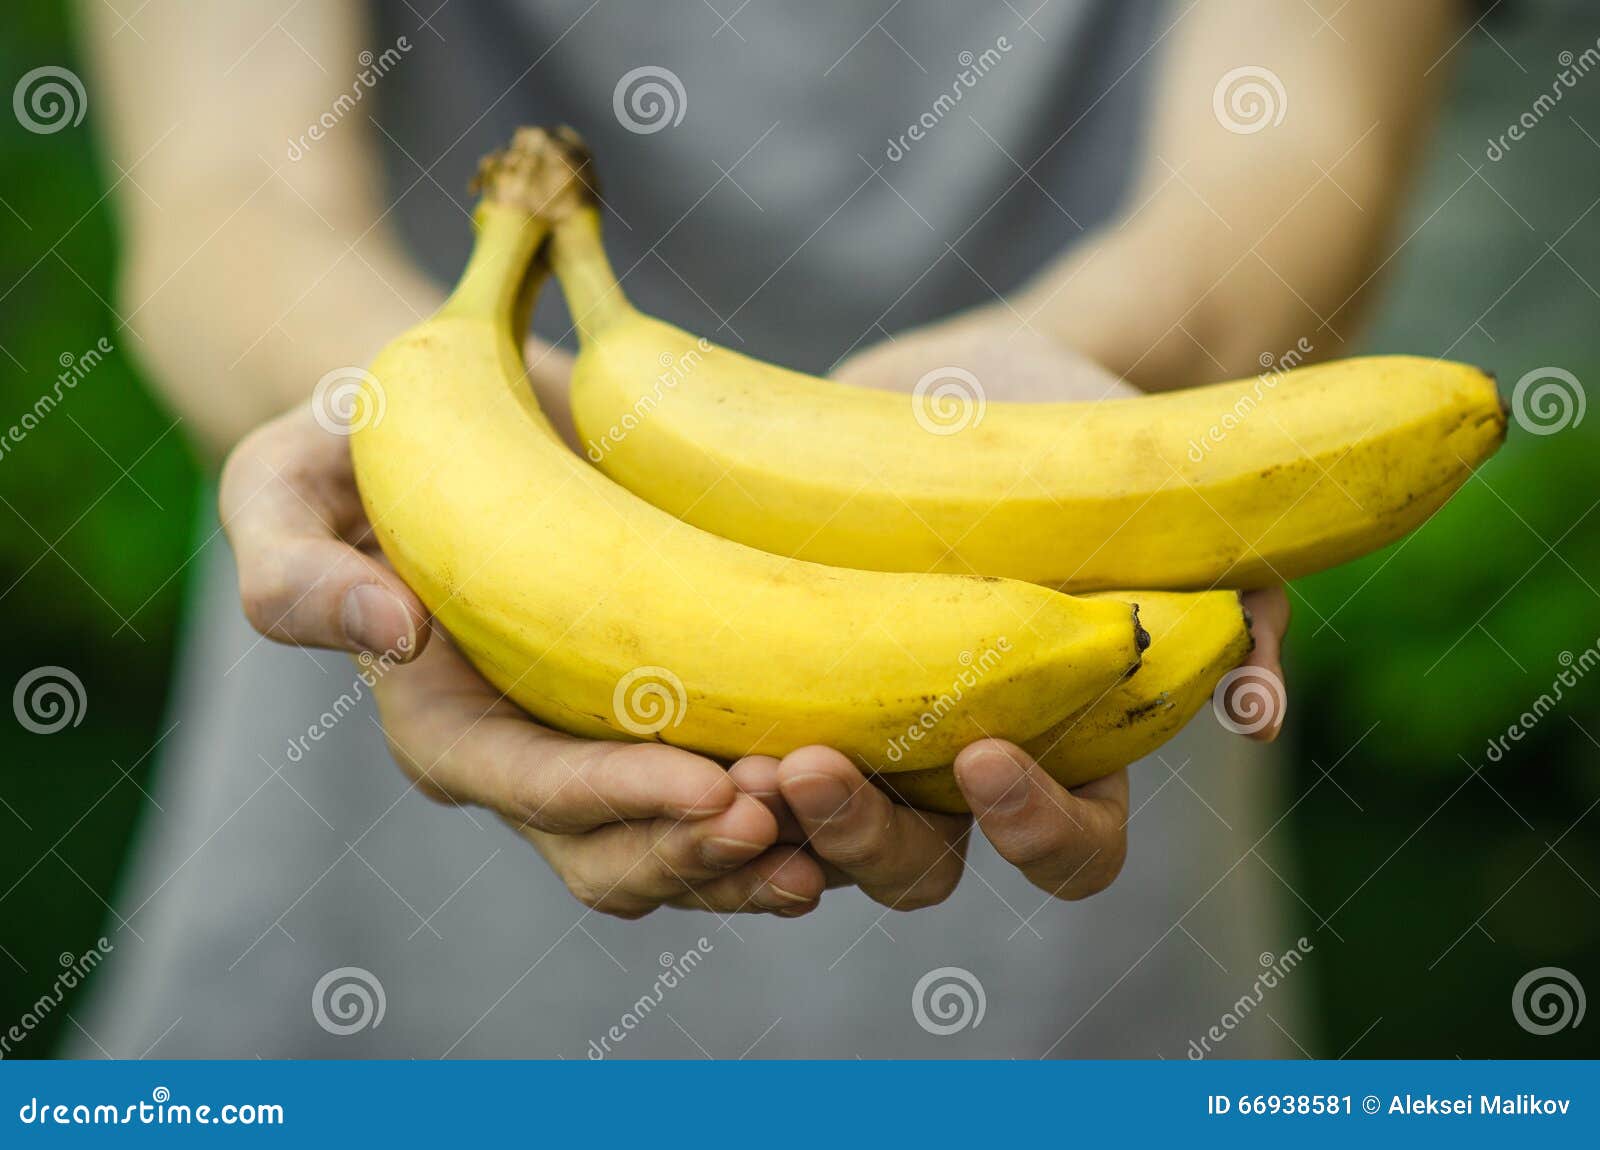 vegetarians and fresh fruit and vegetables on the nature of the theme: human hand holding a bunch of bananas on a background of gr